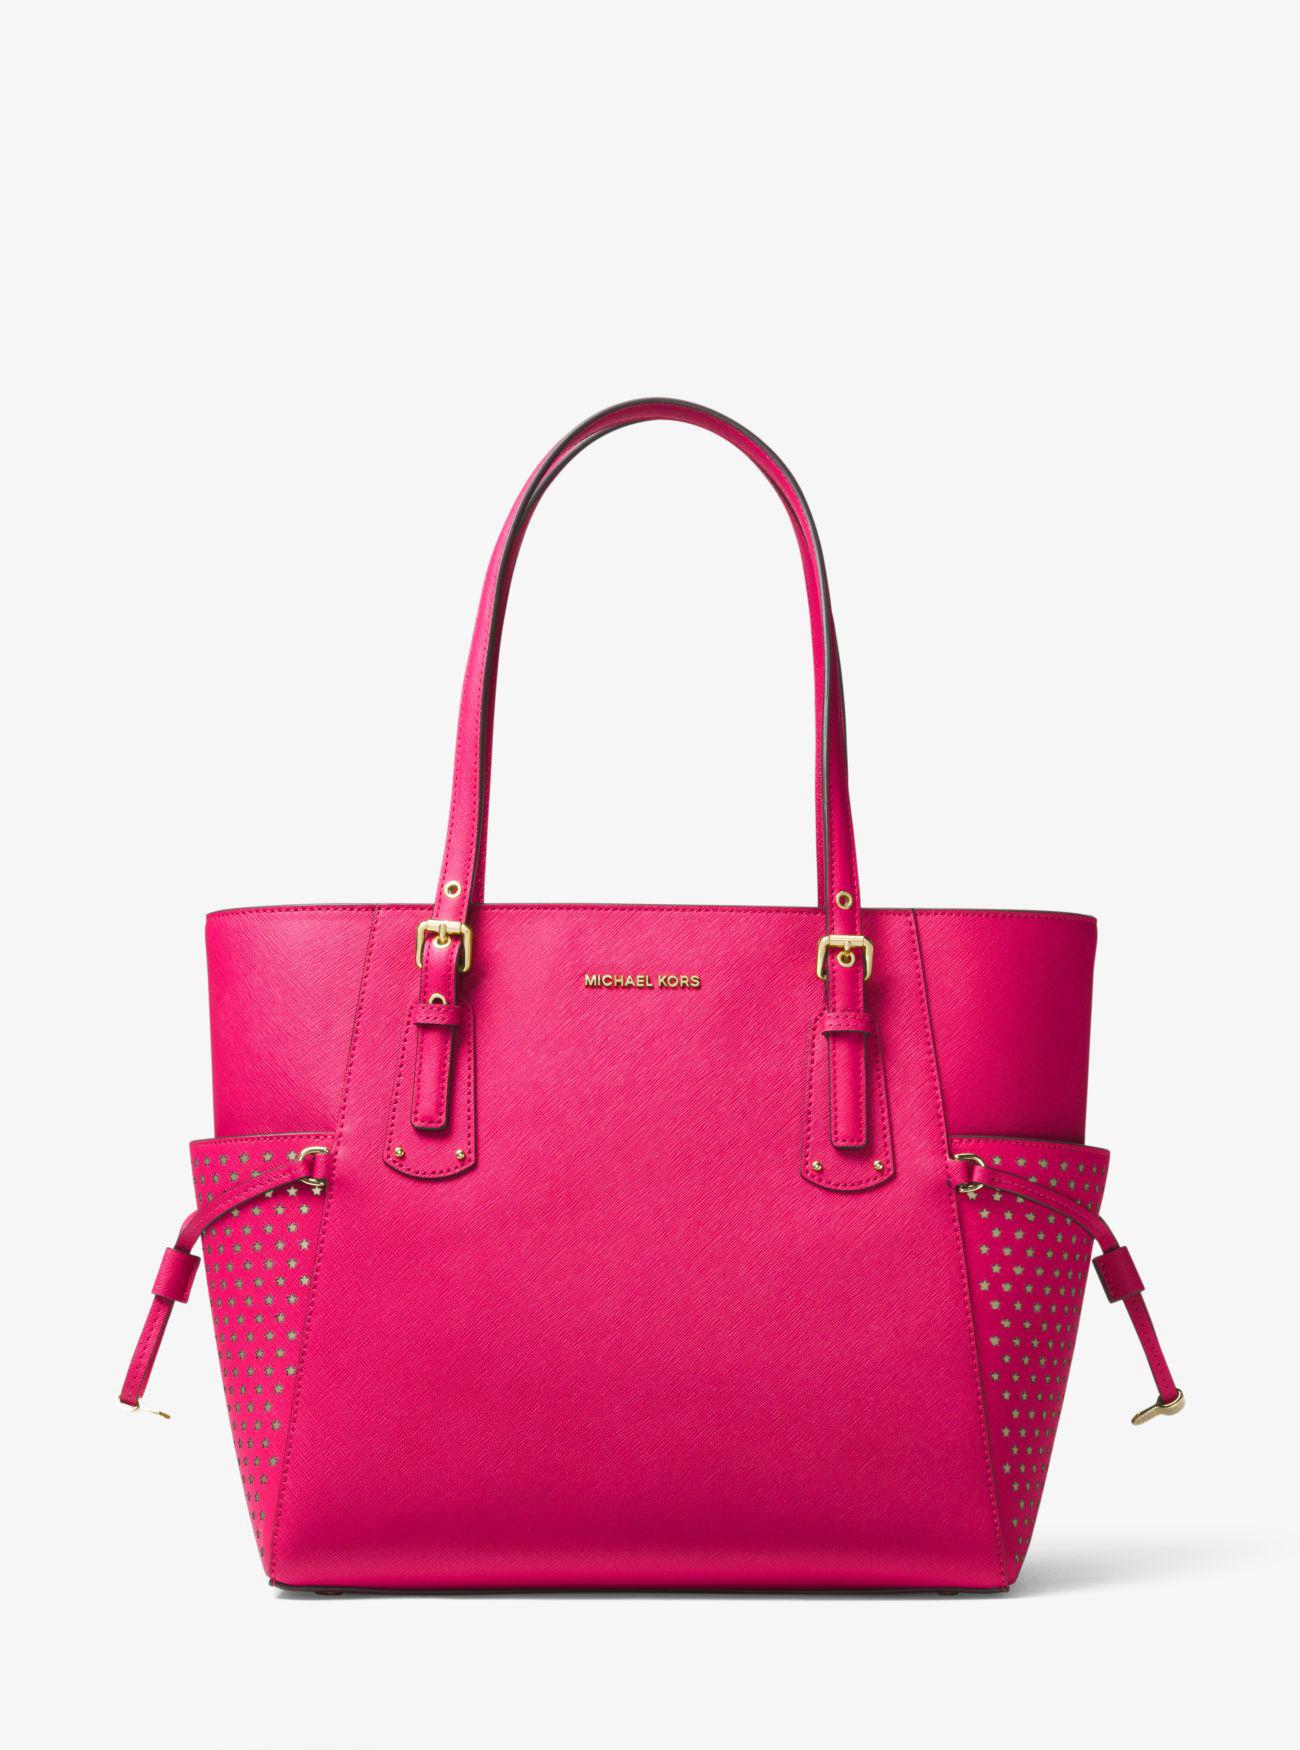 Michael Kors Voyager Small Saffiano Leather Tote Bag in Ultra Pink ...